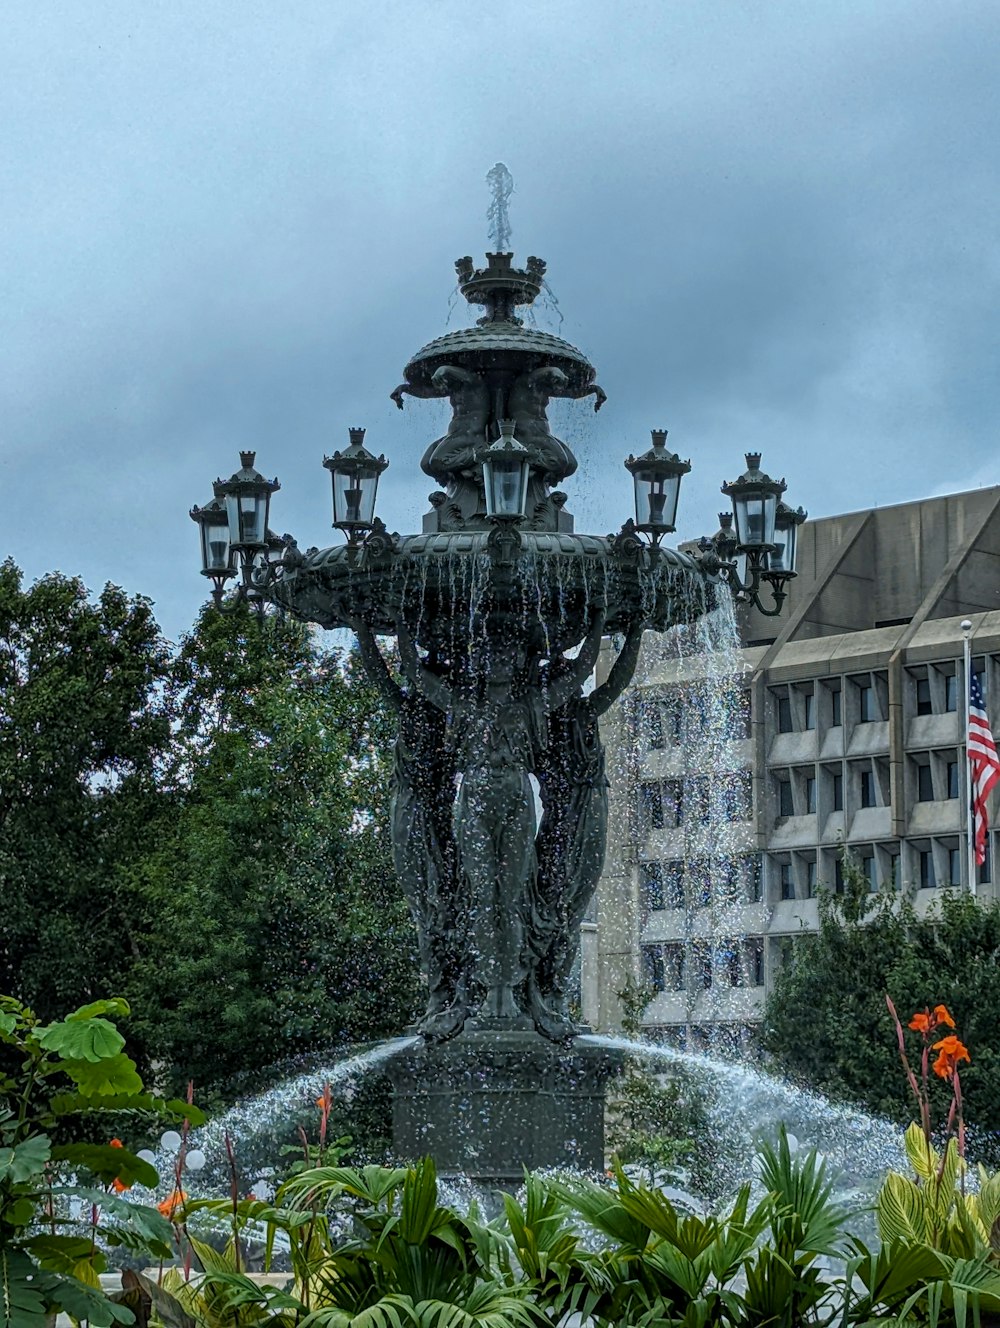 a water fountain with a clock tower in the background